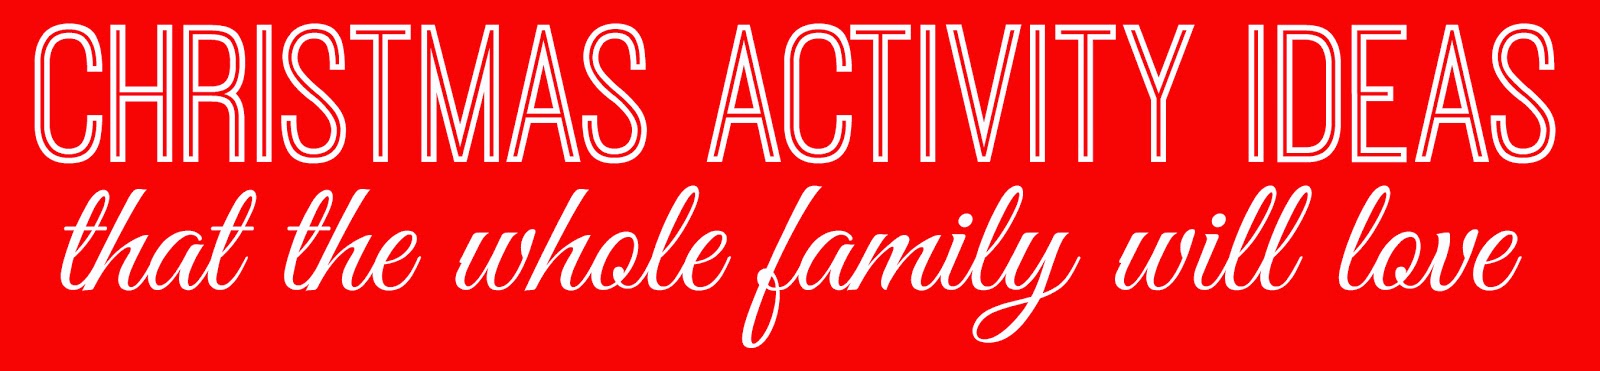 Christmas Activity Ideas for the Family - New Christmas Traditions